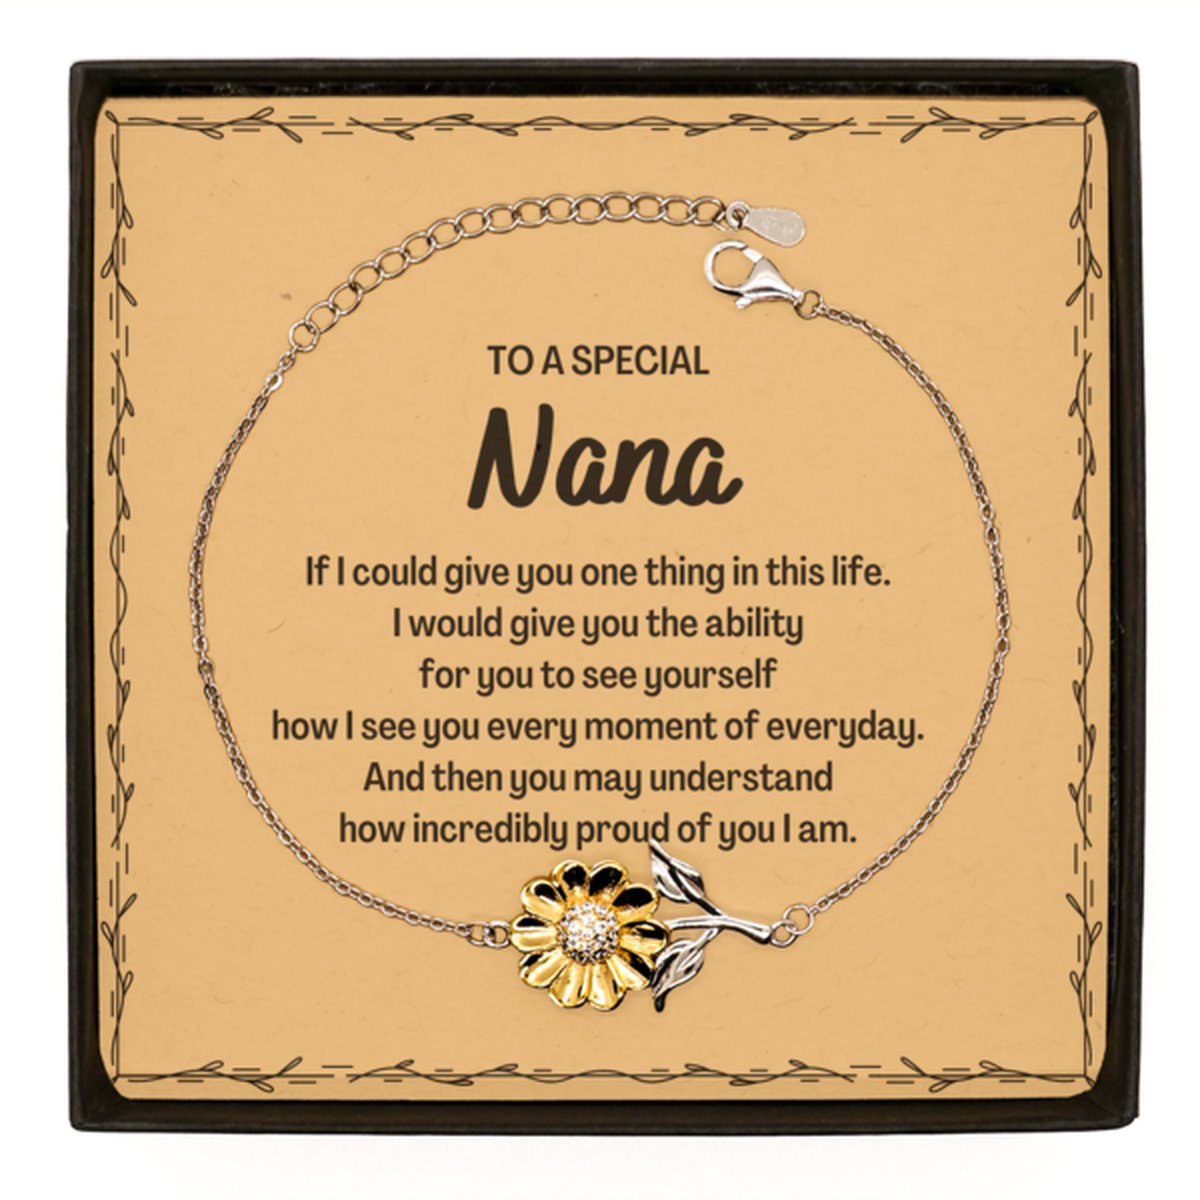 To My Nana Sunflower Bracelet, Gifts For Nana Message Card, Inspirational Gifts for Christmas Birthday, Epic Gifts for Nana To A Special Nana how incredibly proud of you I am